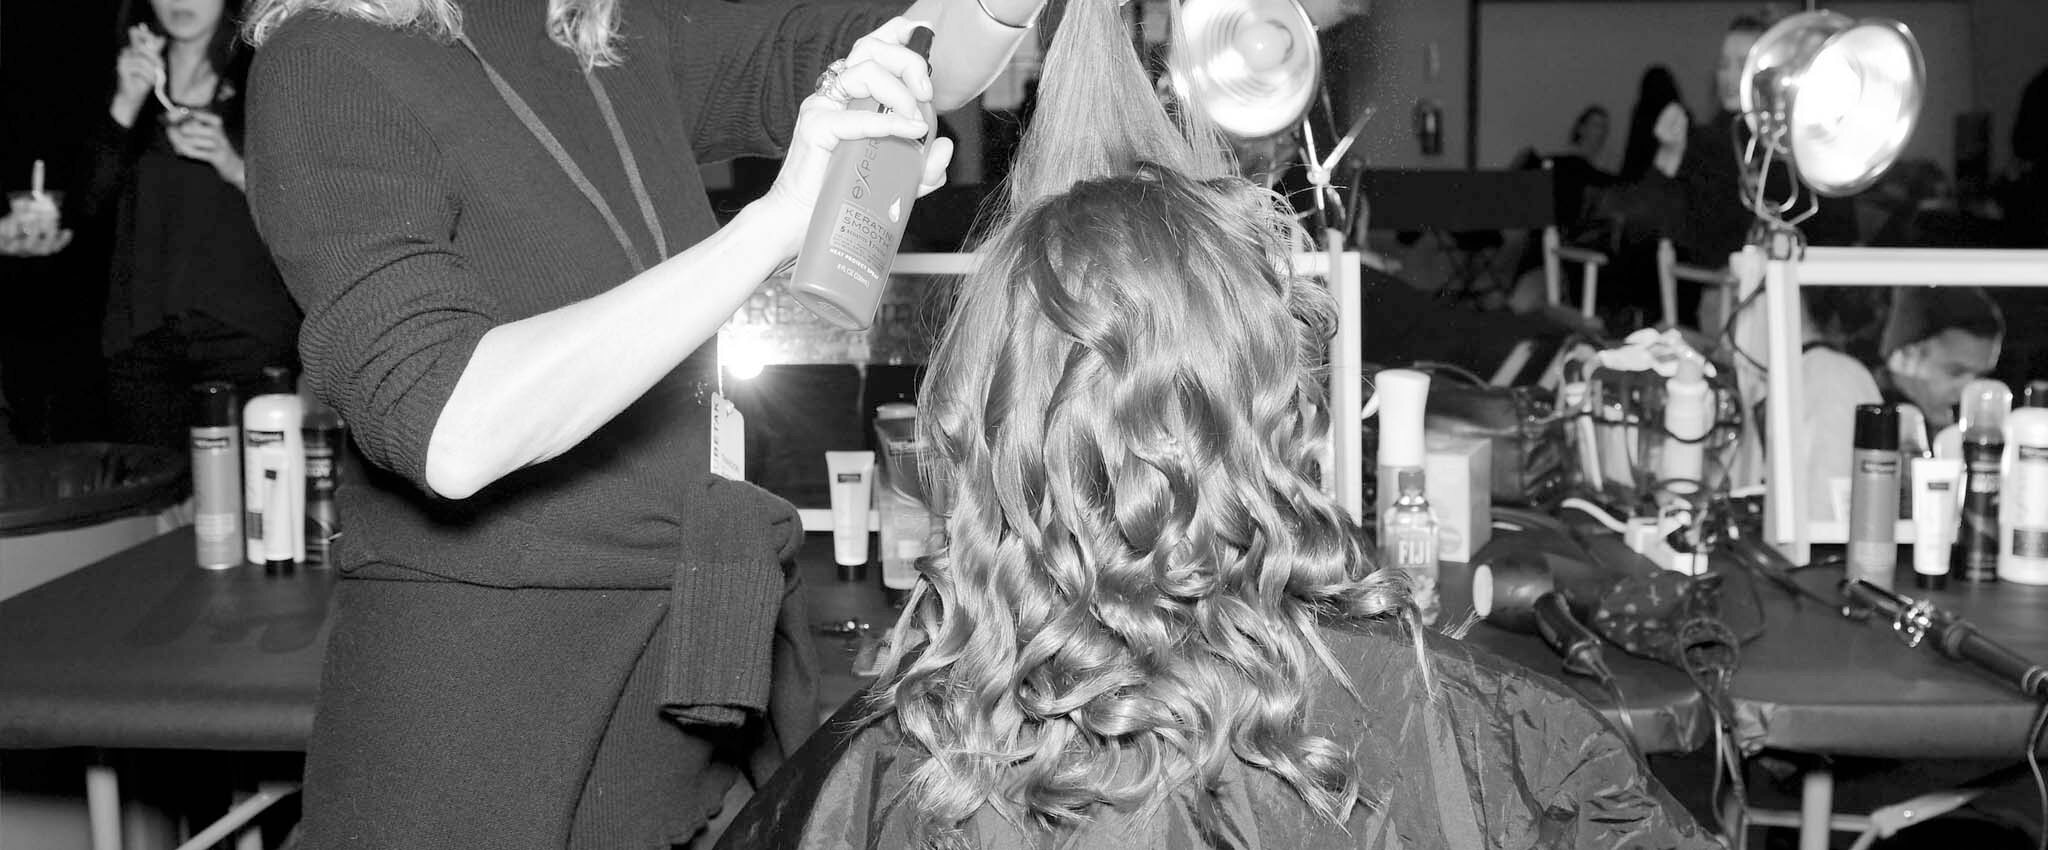 A model with curly hair getting her hair set by a stylist.